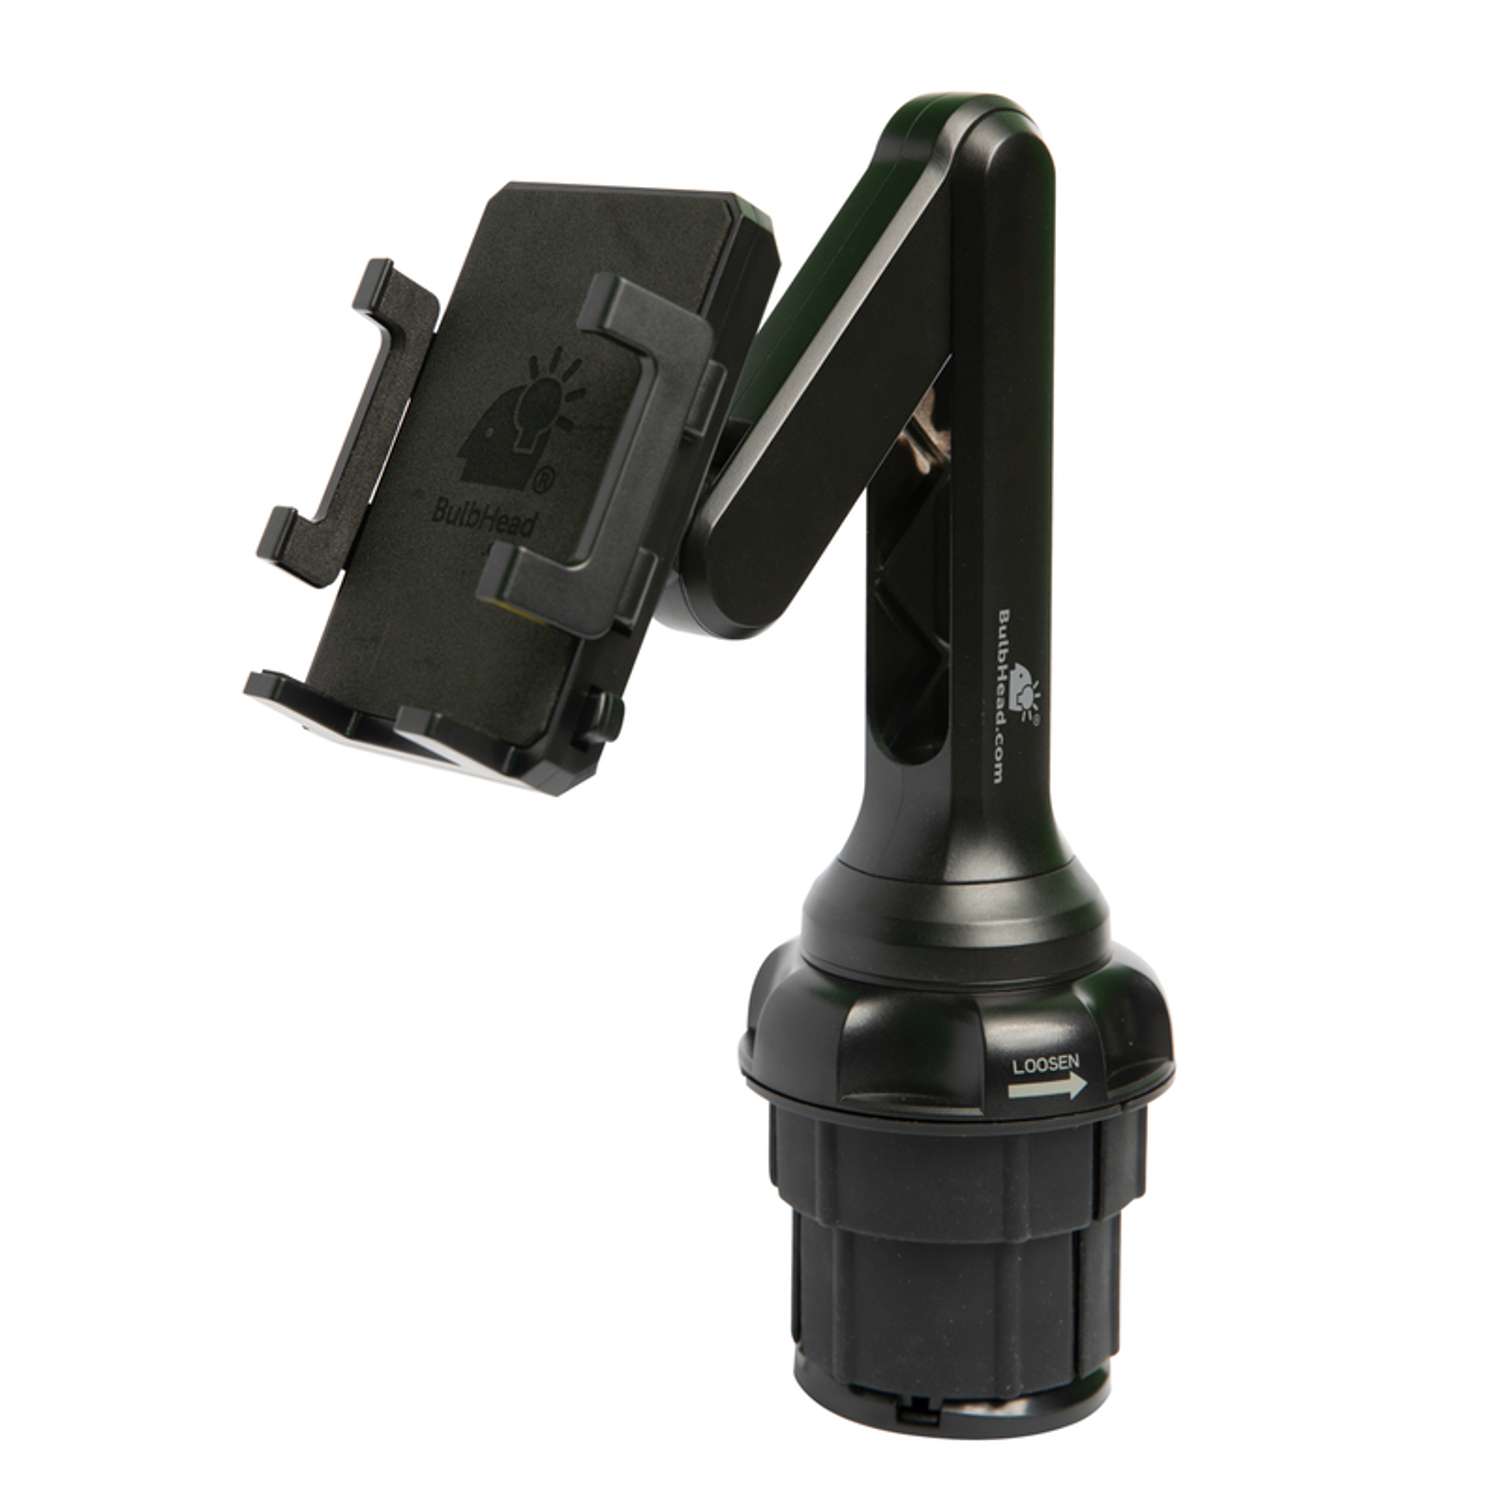 Bulbhead Cup Call Crane Black Cell Phone Holder - Ace Hardware